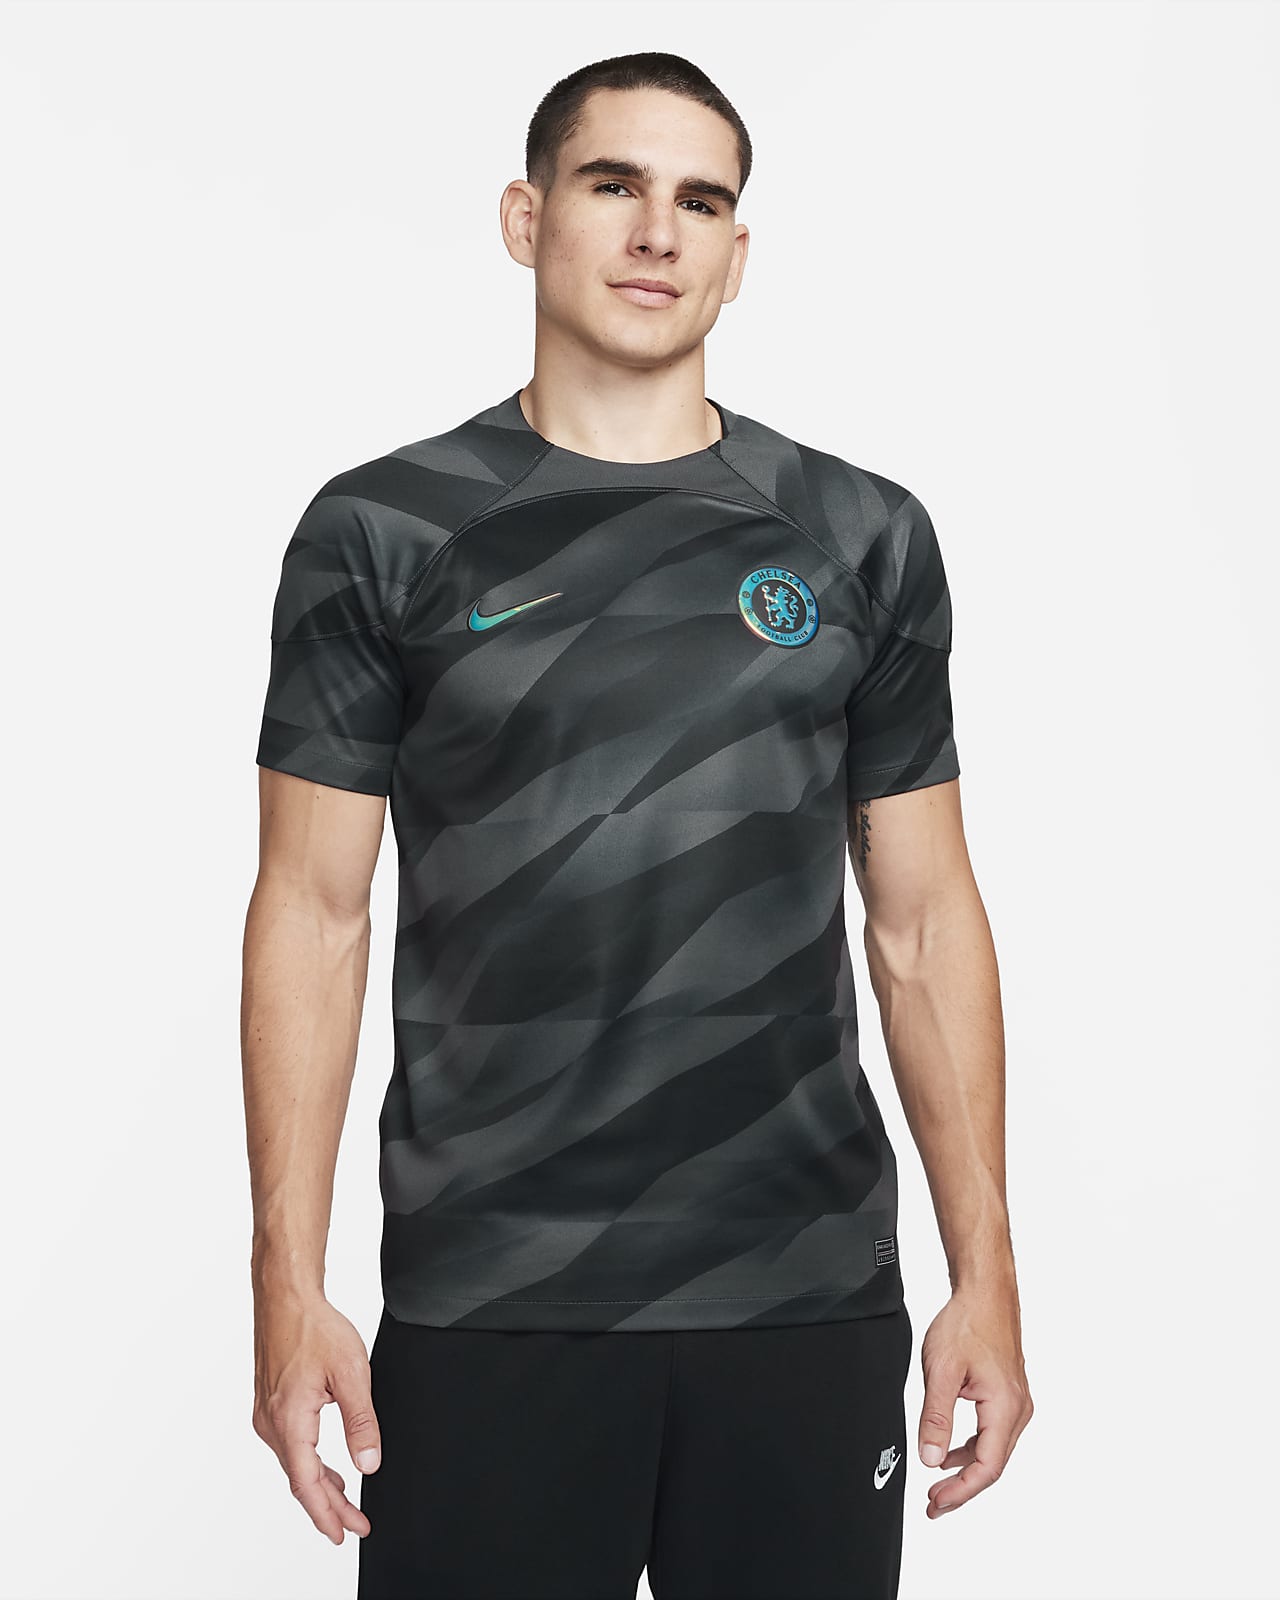 Camisa do Chelsea  Football jersey outfit, Football shirt designs